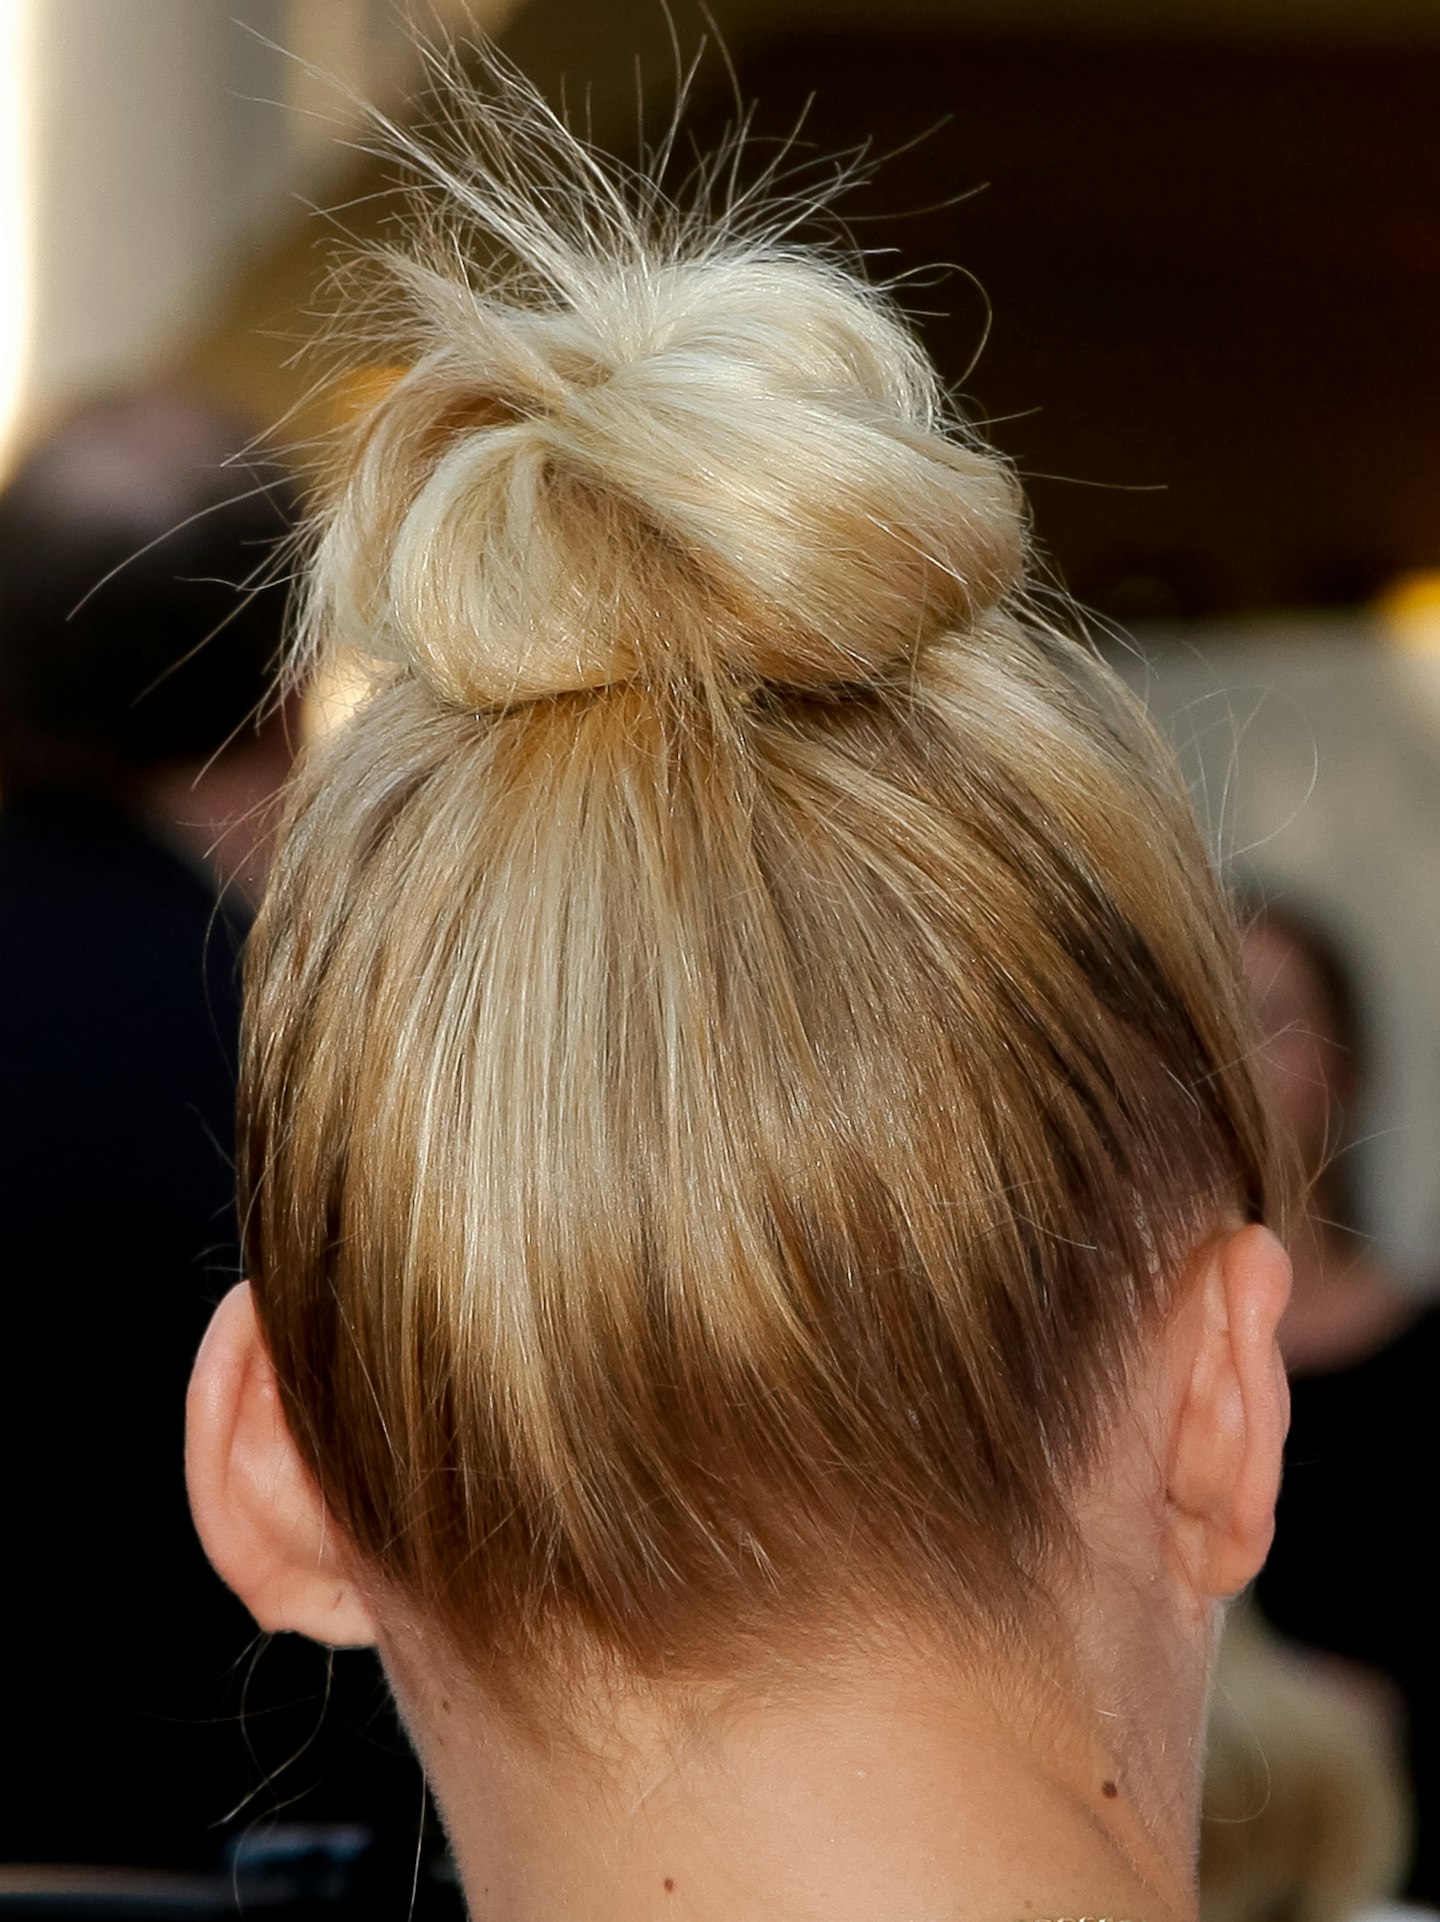 Best topknot hairstyles